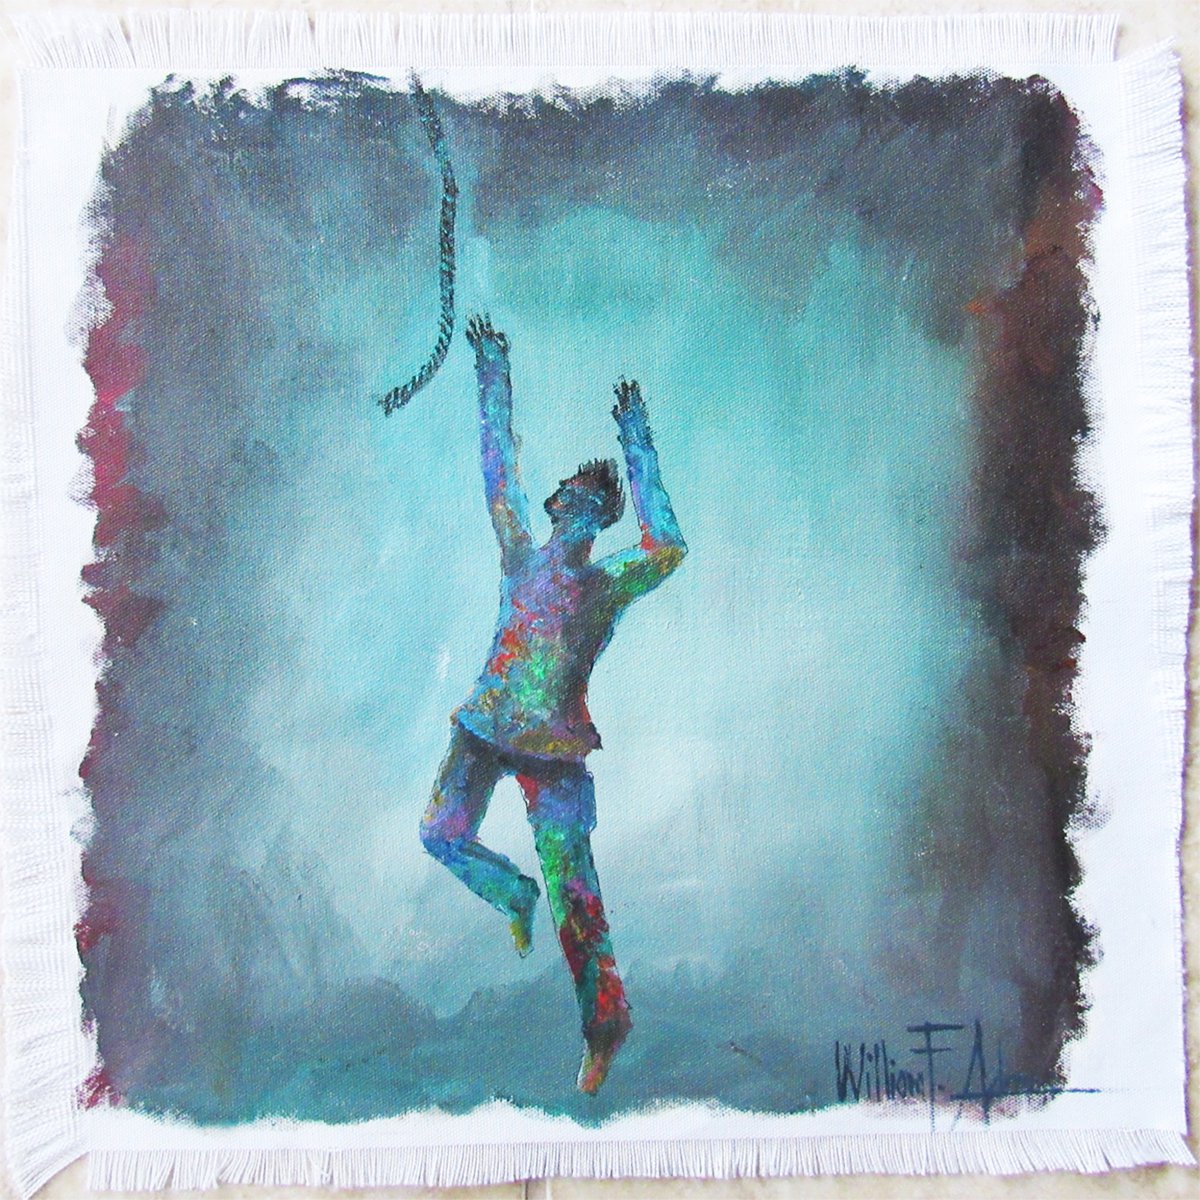 At the End of Your Rope ... LET GO! (version #2- male) by William F. Adams